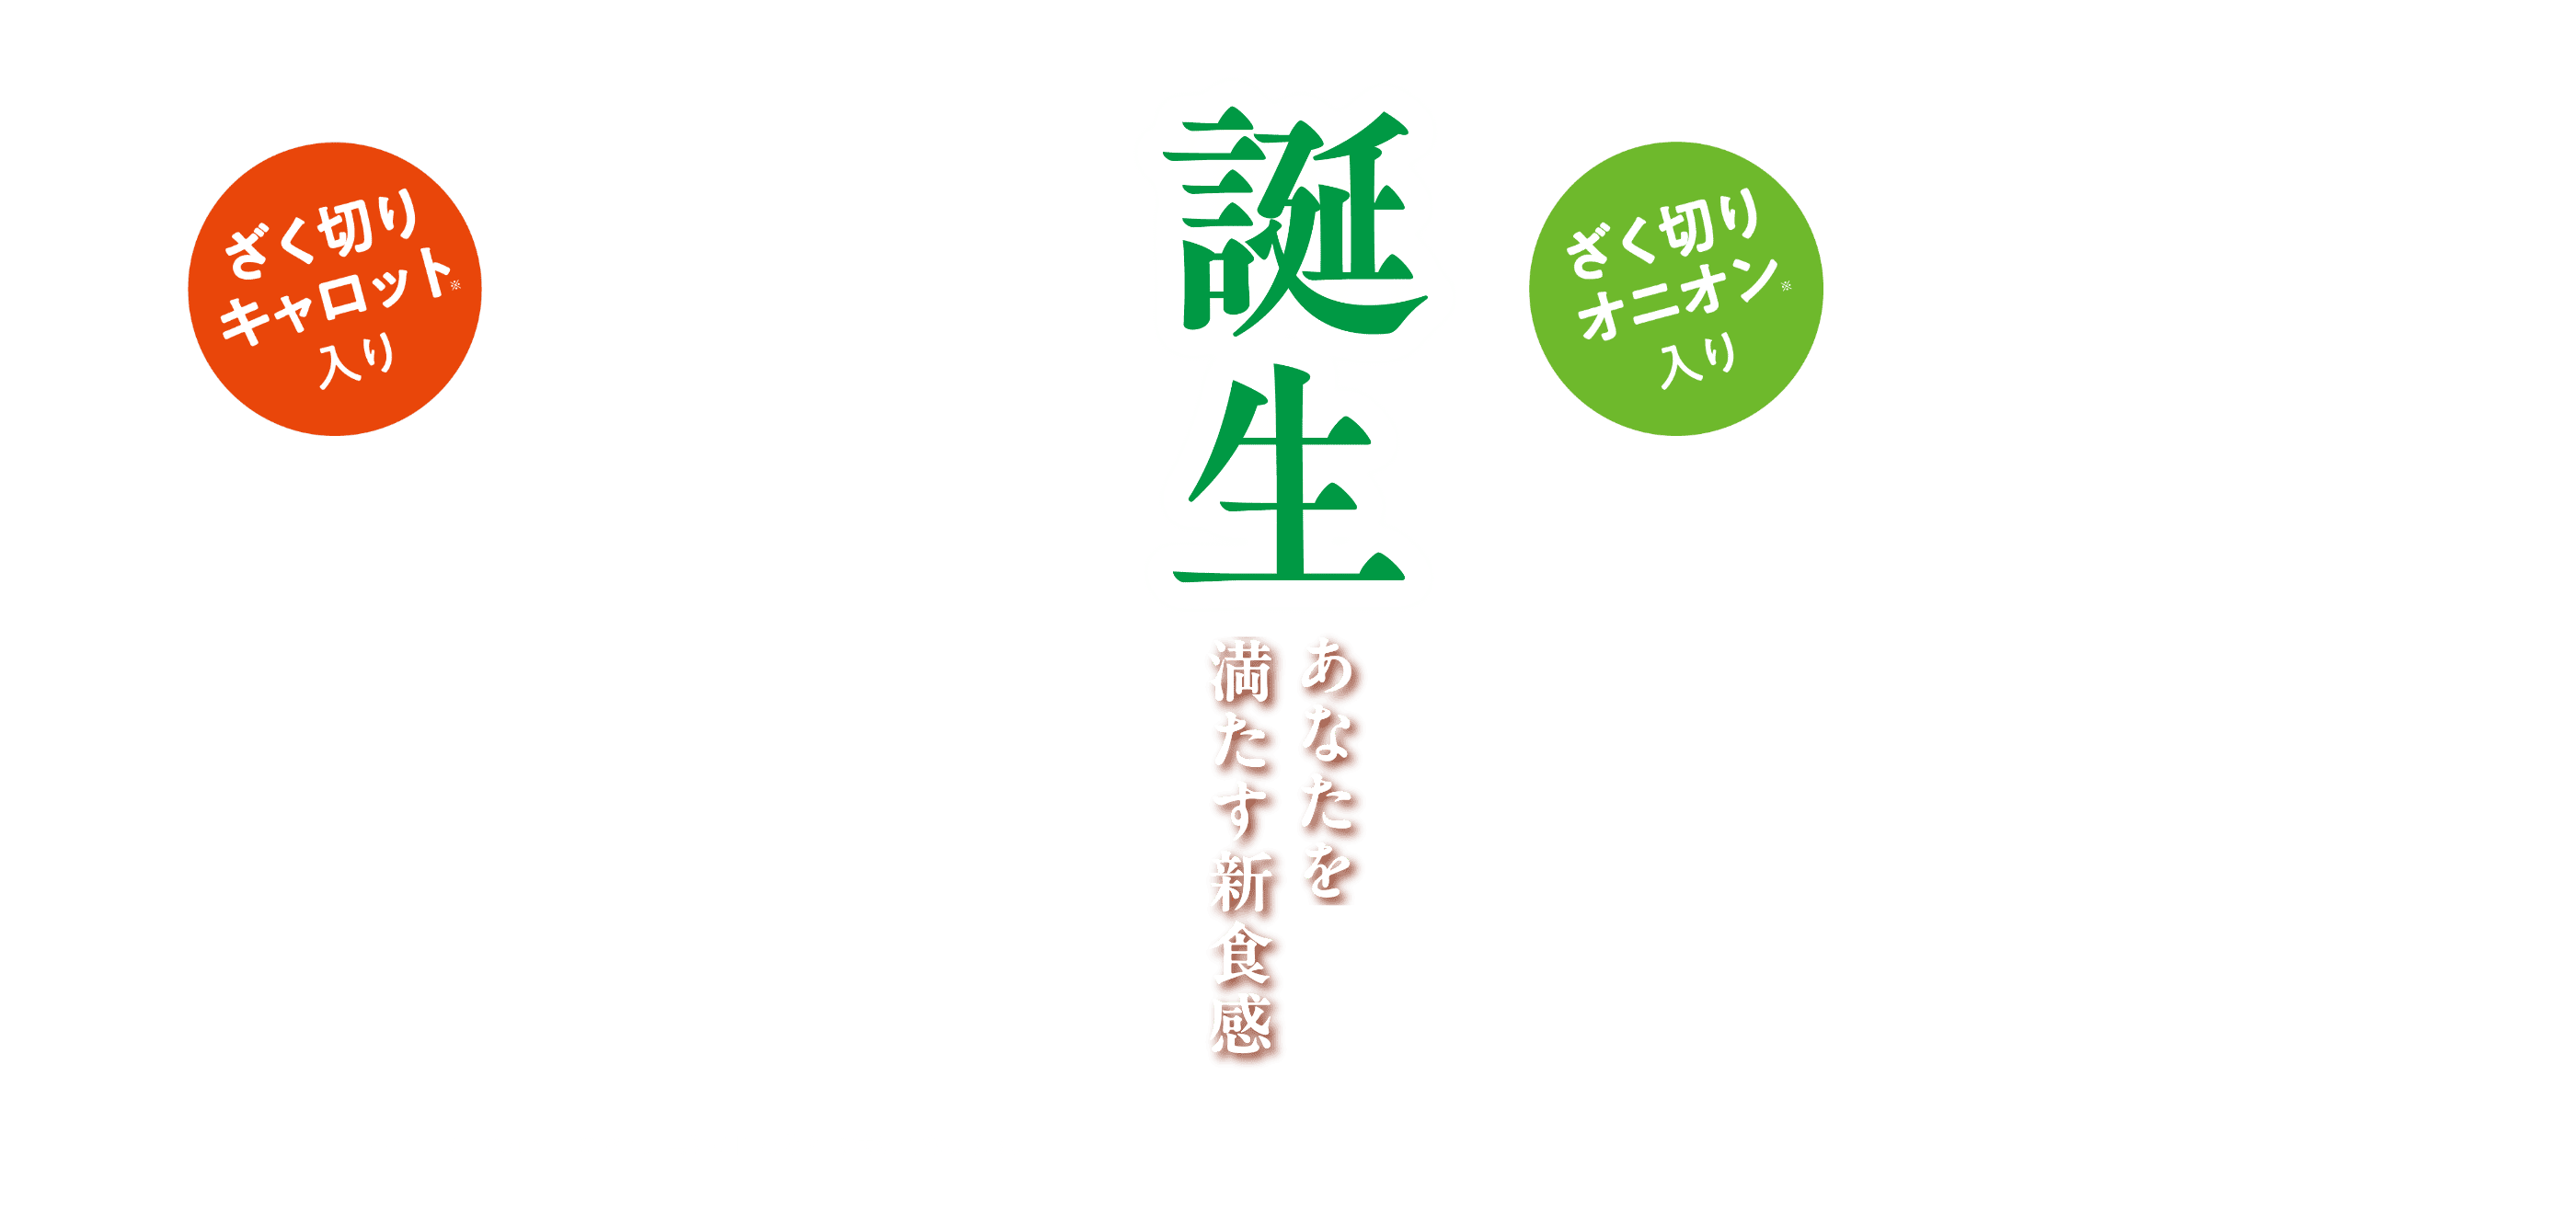 mealup誕生あなたを満たす新食感